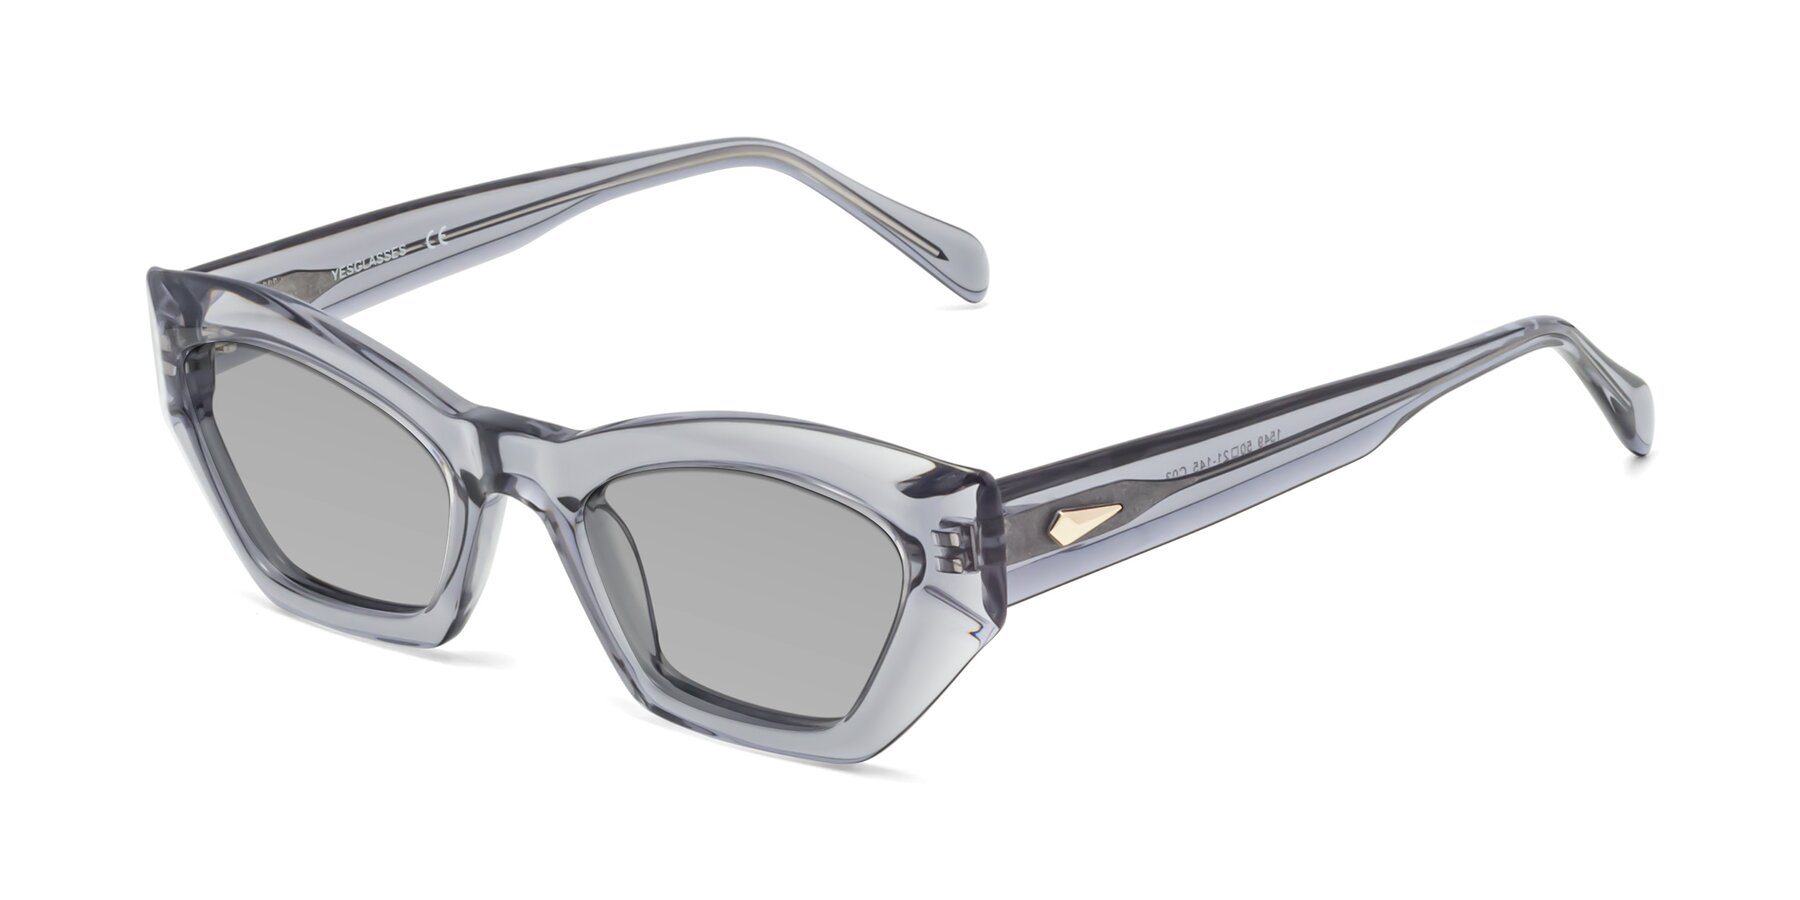 Angle of 1549 in Gray with Light Gray Tinted Lenses